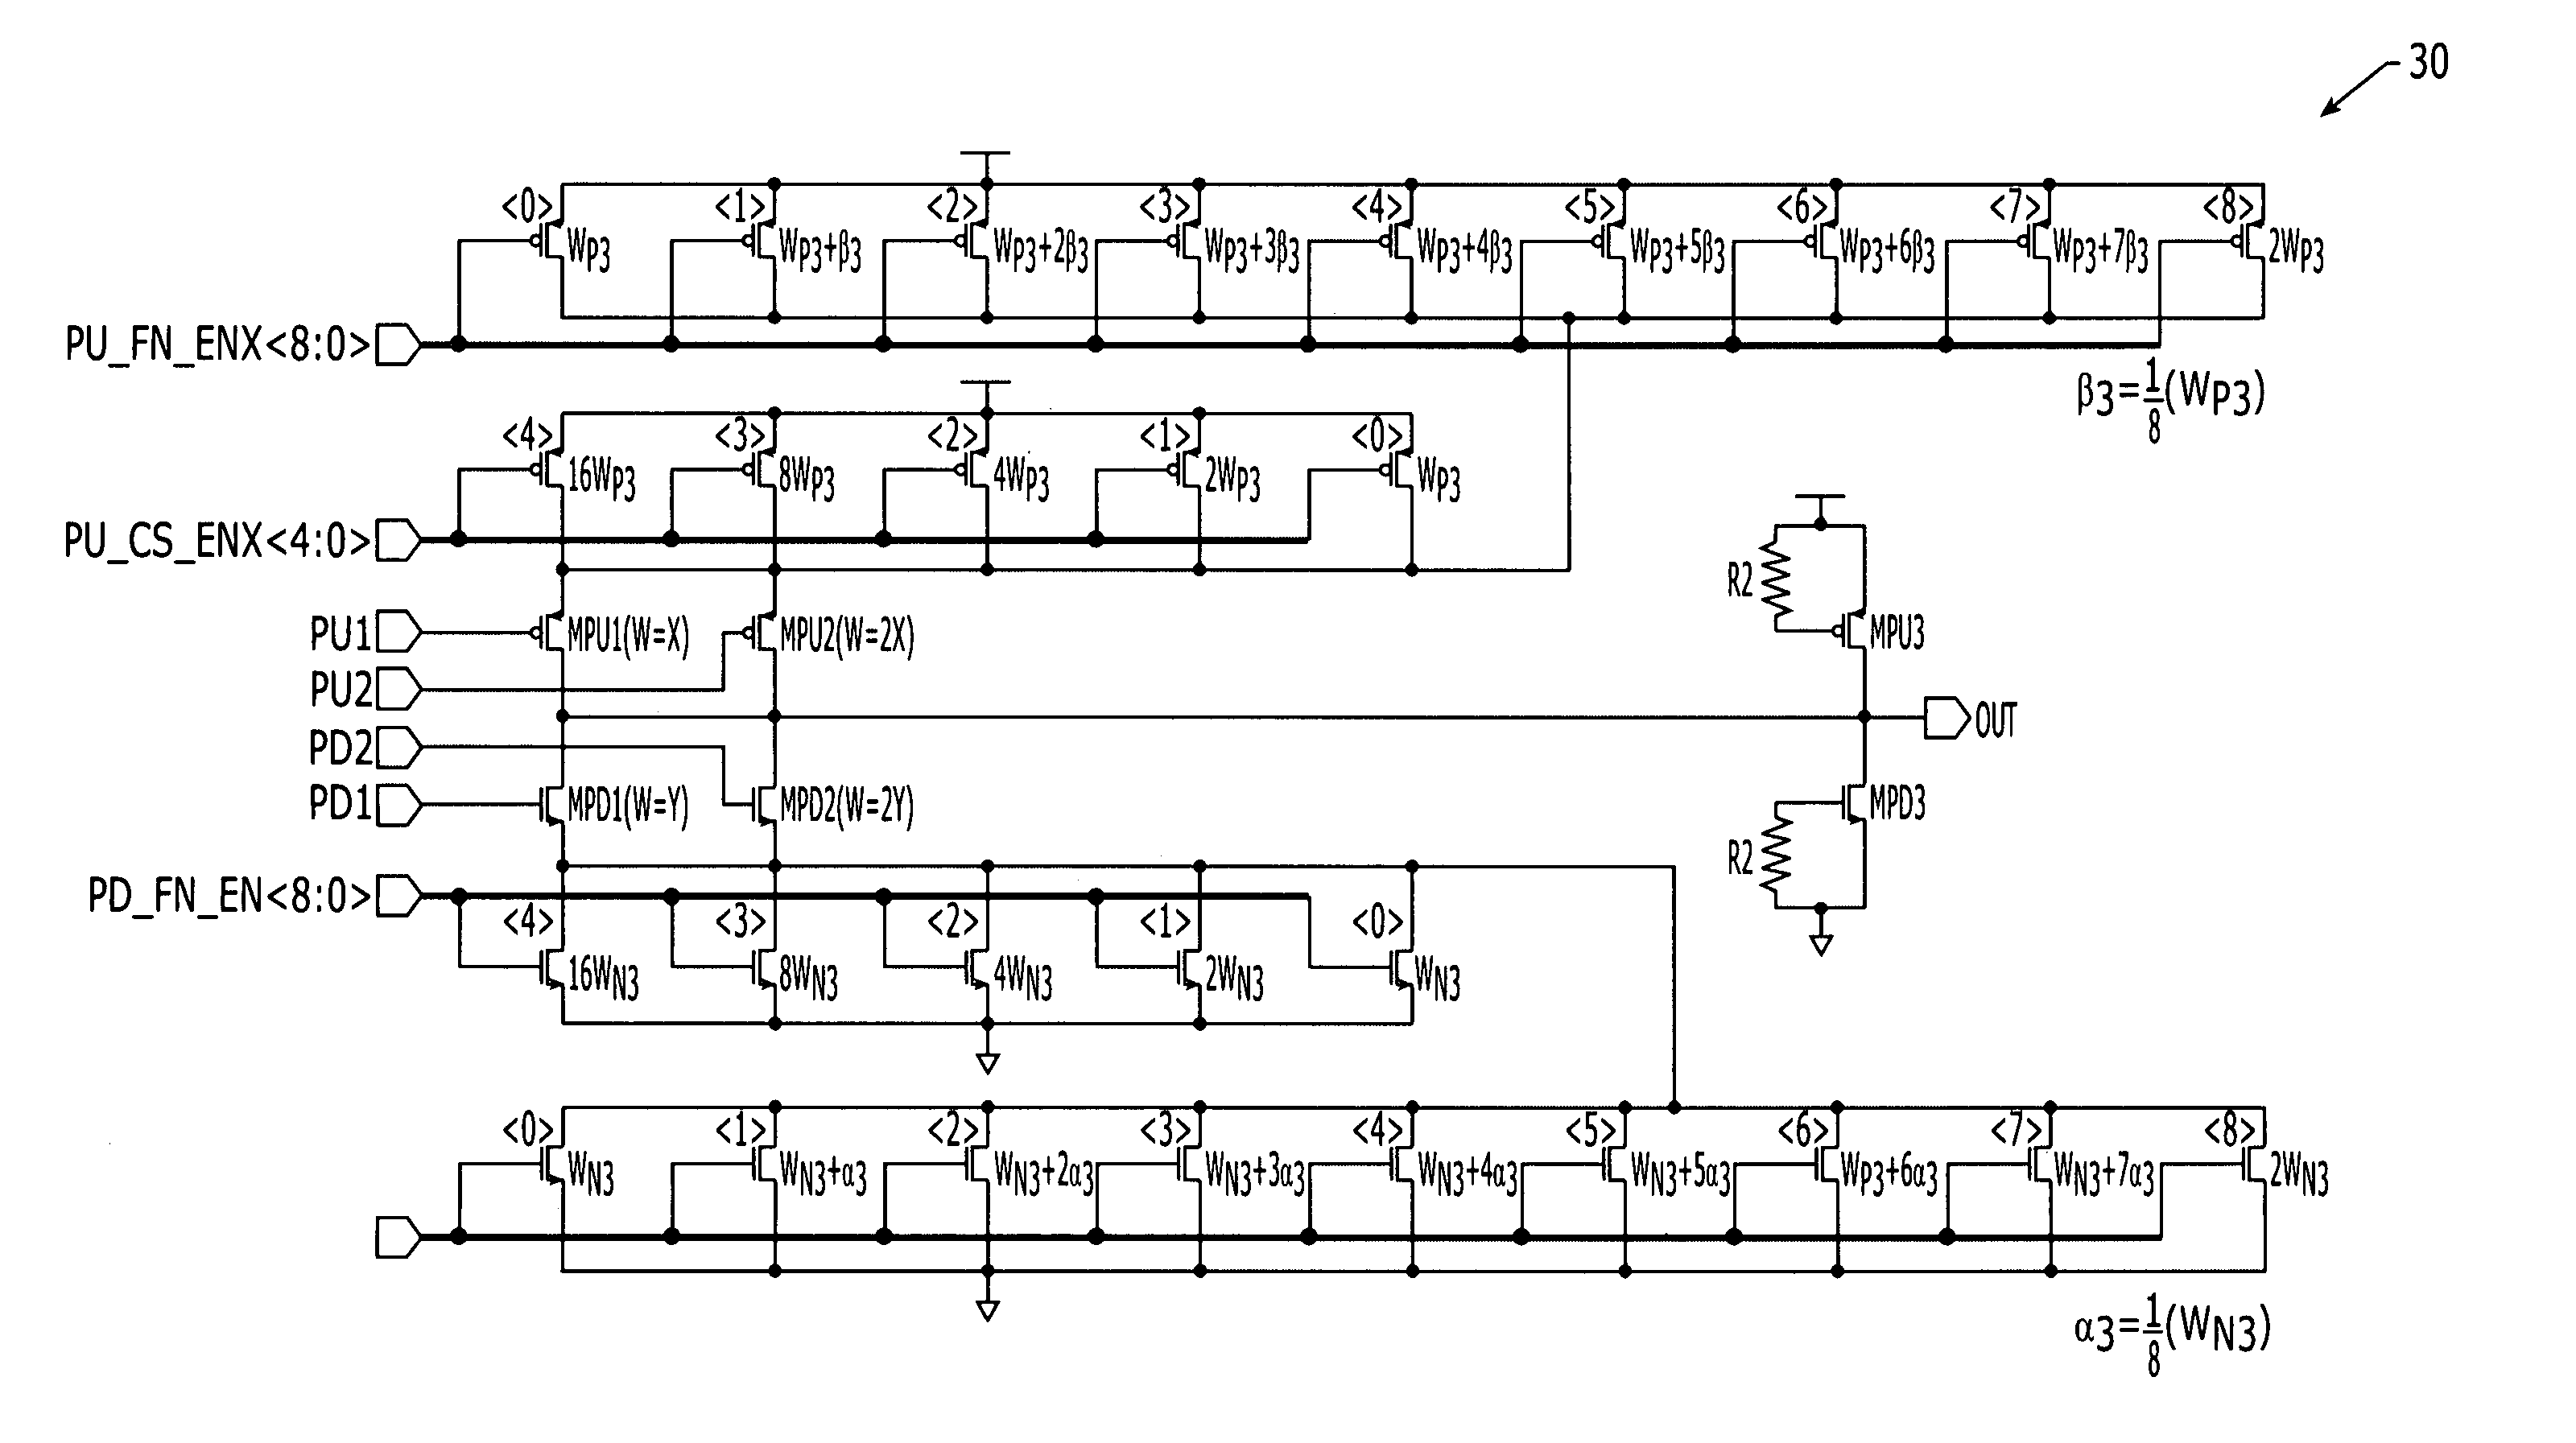 Impedance-matched output driver circuits having coarse and fine tuning control